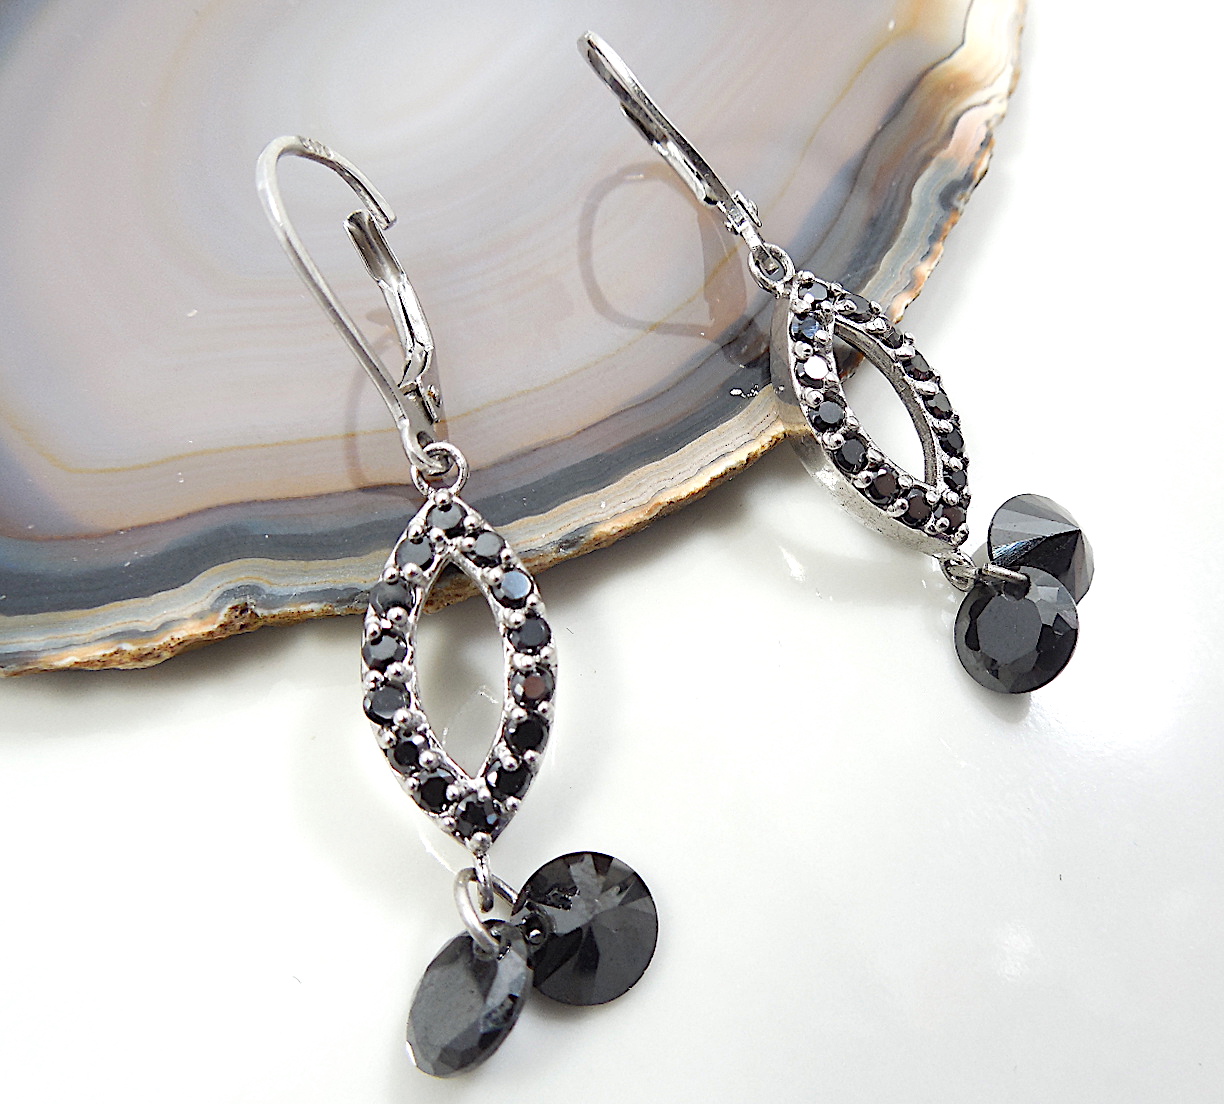 Silver Hinged Earrings With Black Stone - Image 2 of 4